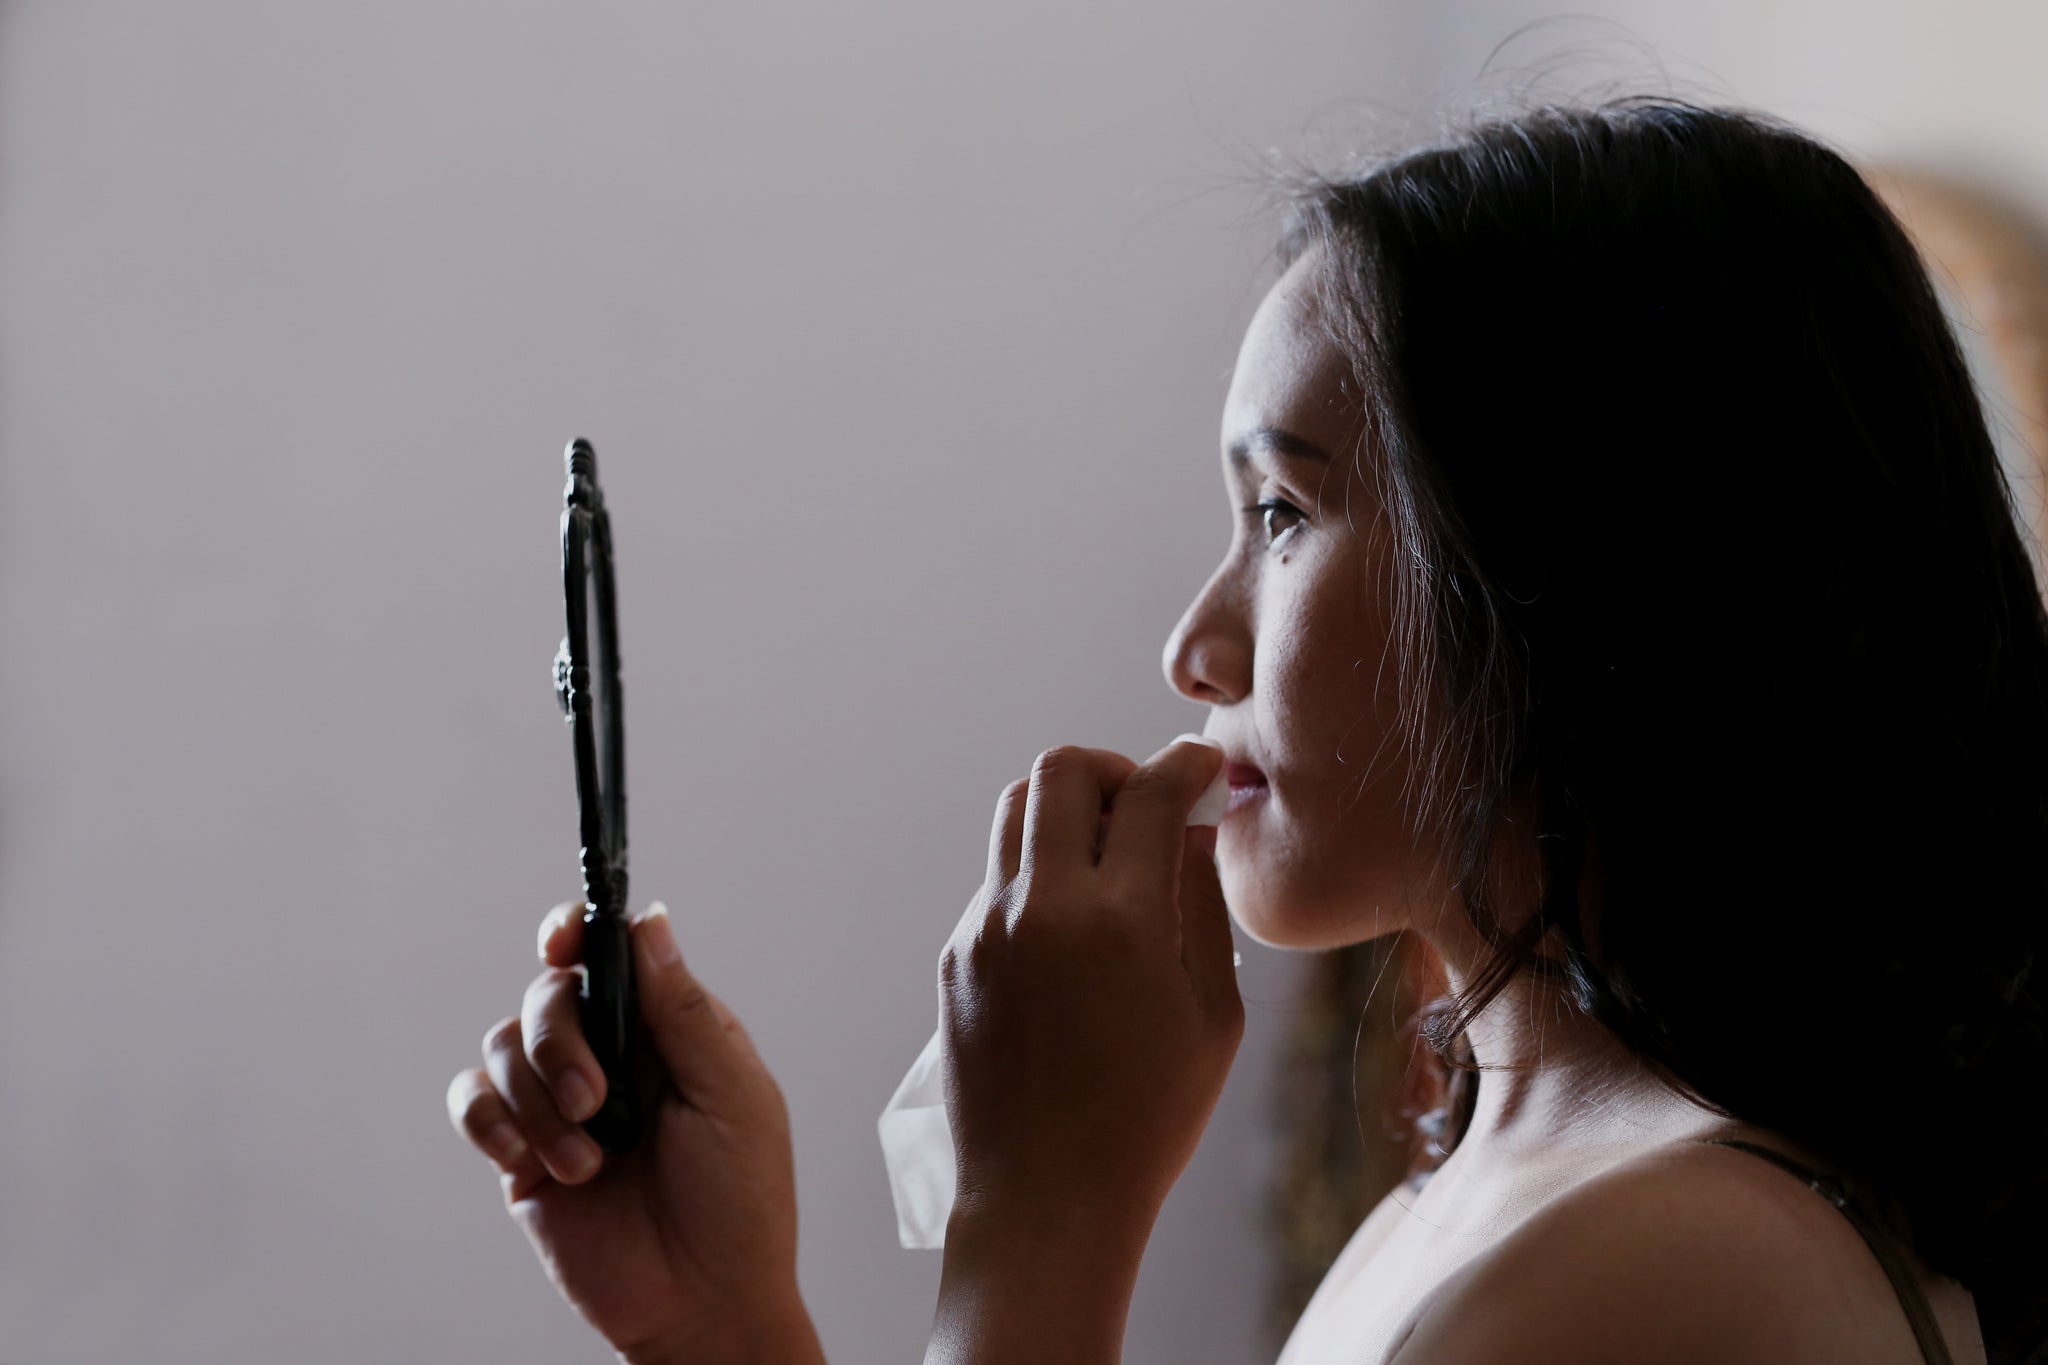 Woman removing lipstick while looking in a handheld mirror